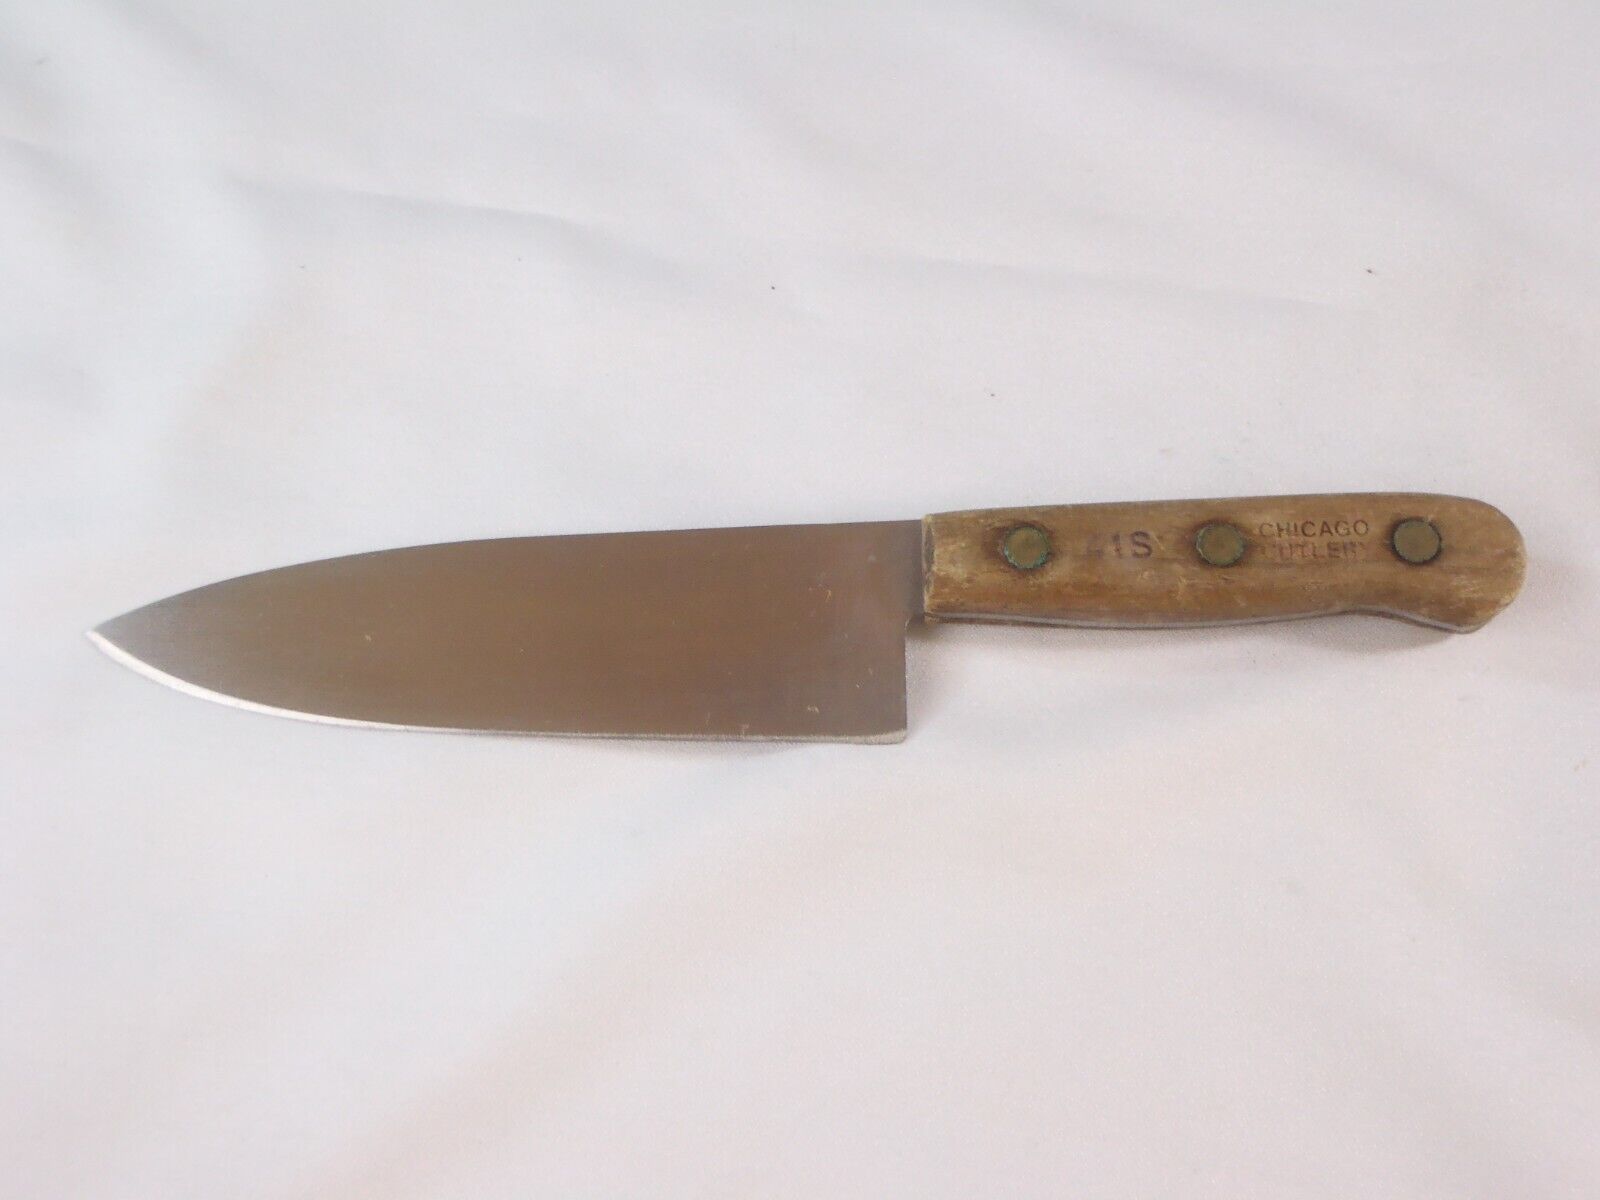 Vintage Chicage Cutlery Old Forged 8” Boning Carving Knife W/Wooden Handle 483-8